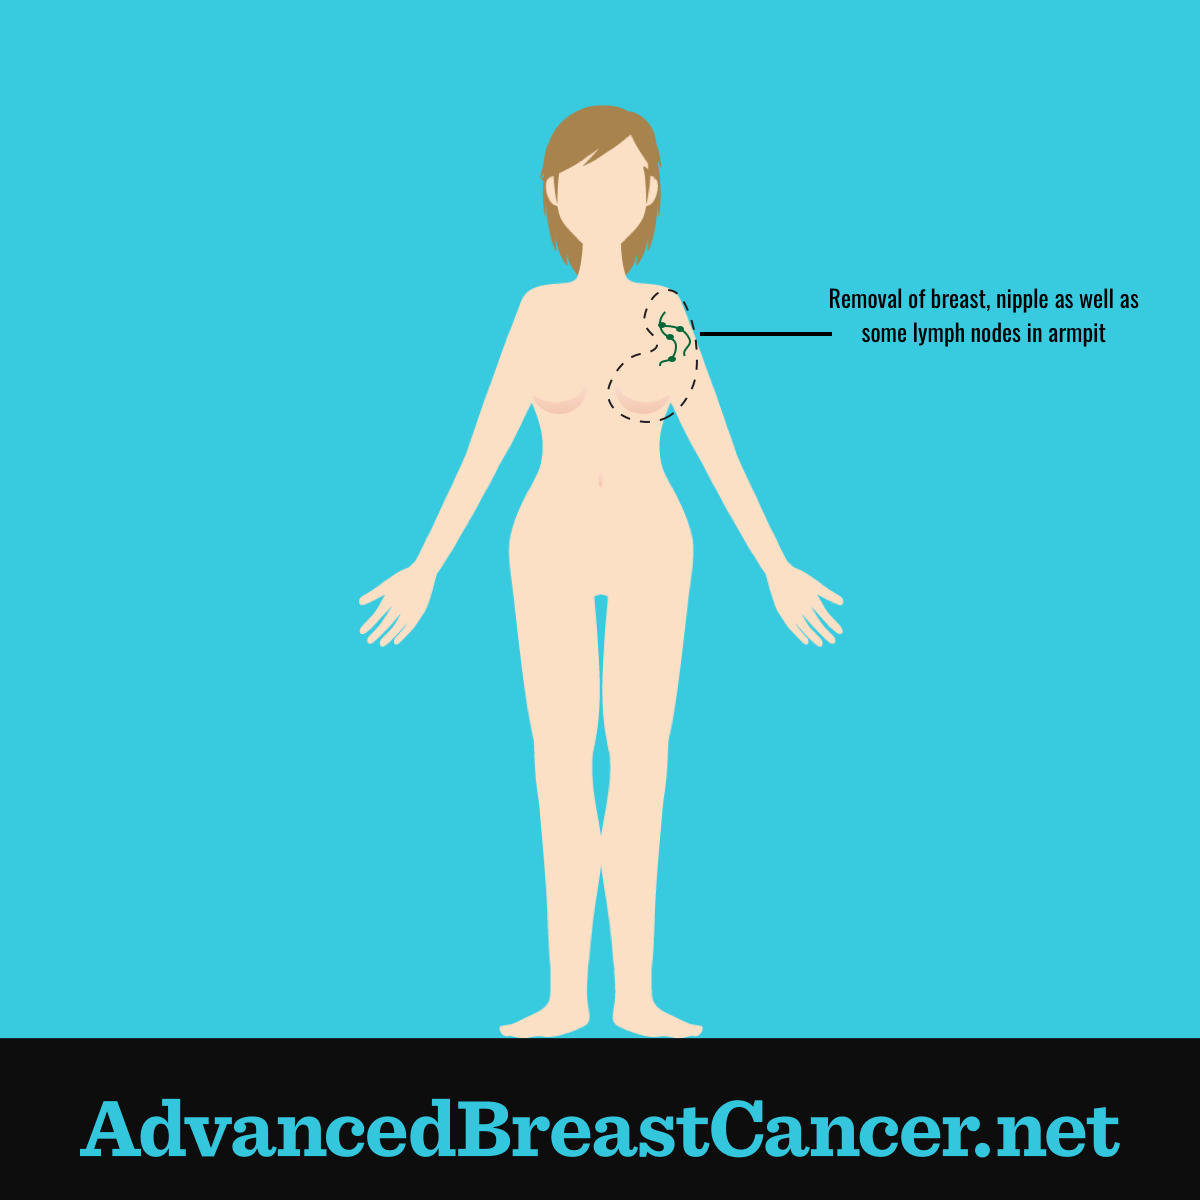 Human figure showing the right breast including skin, nipple, areola, and many axillary lymph nodes are removed.